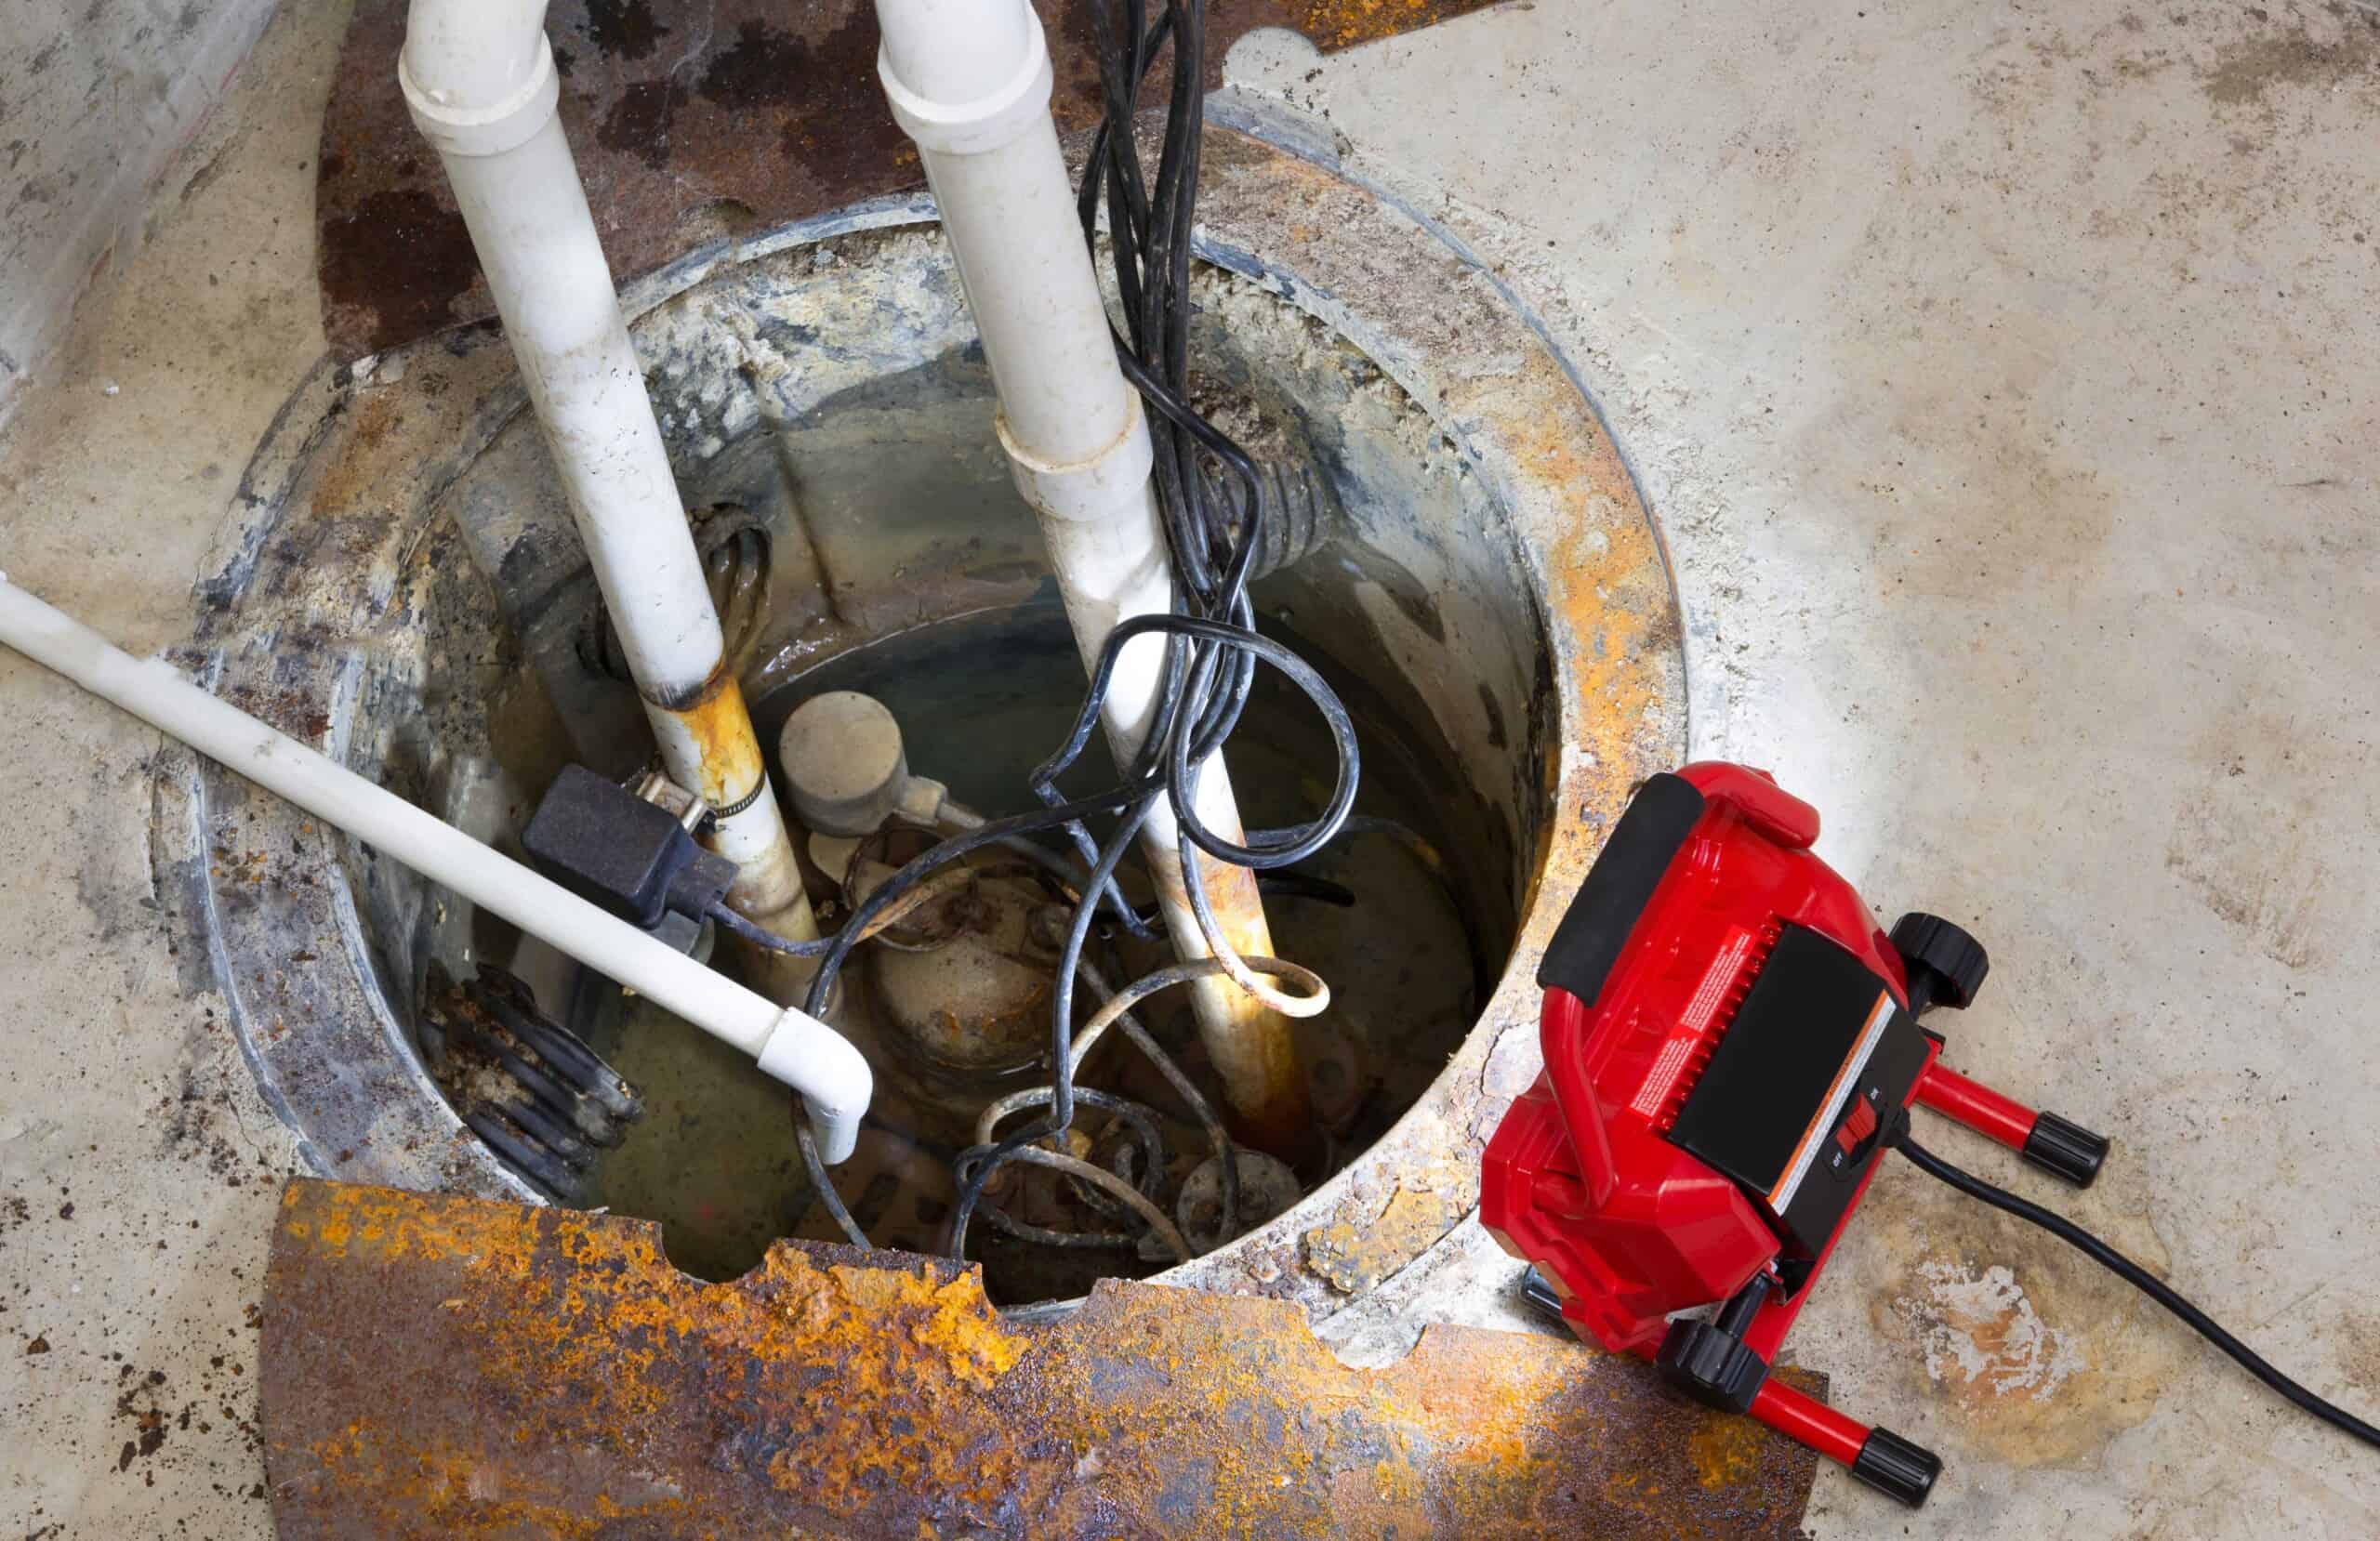 Sump Pump Making Noise Every Few Minutes: Troubleshooting Guide